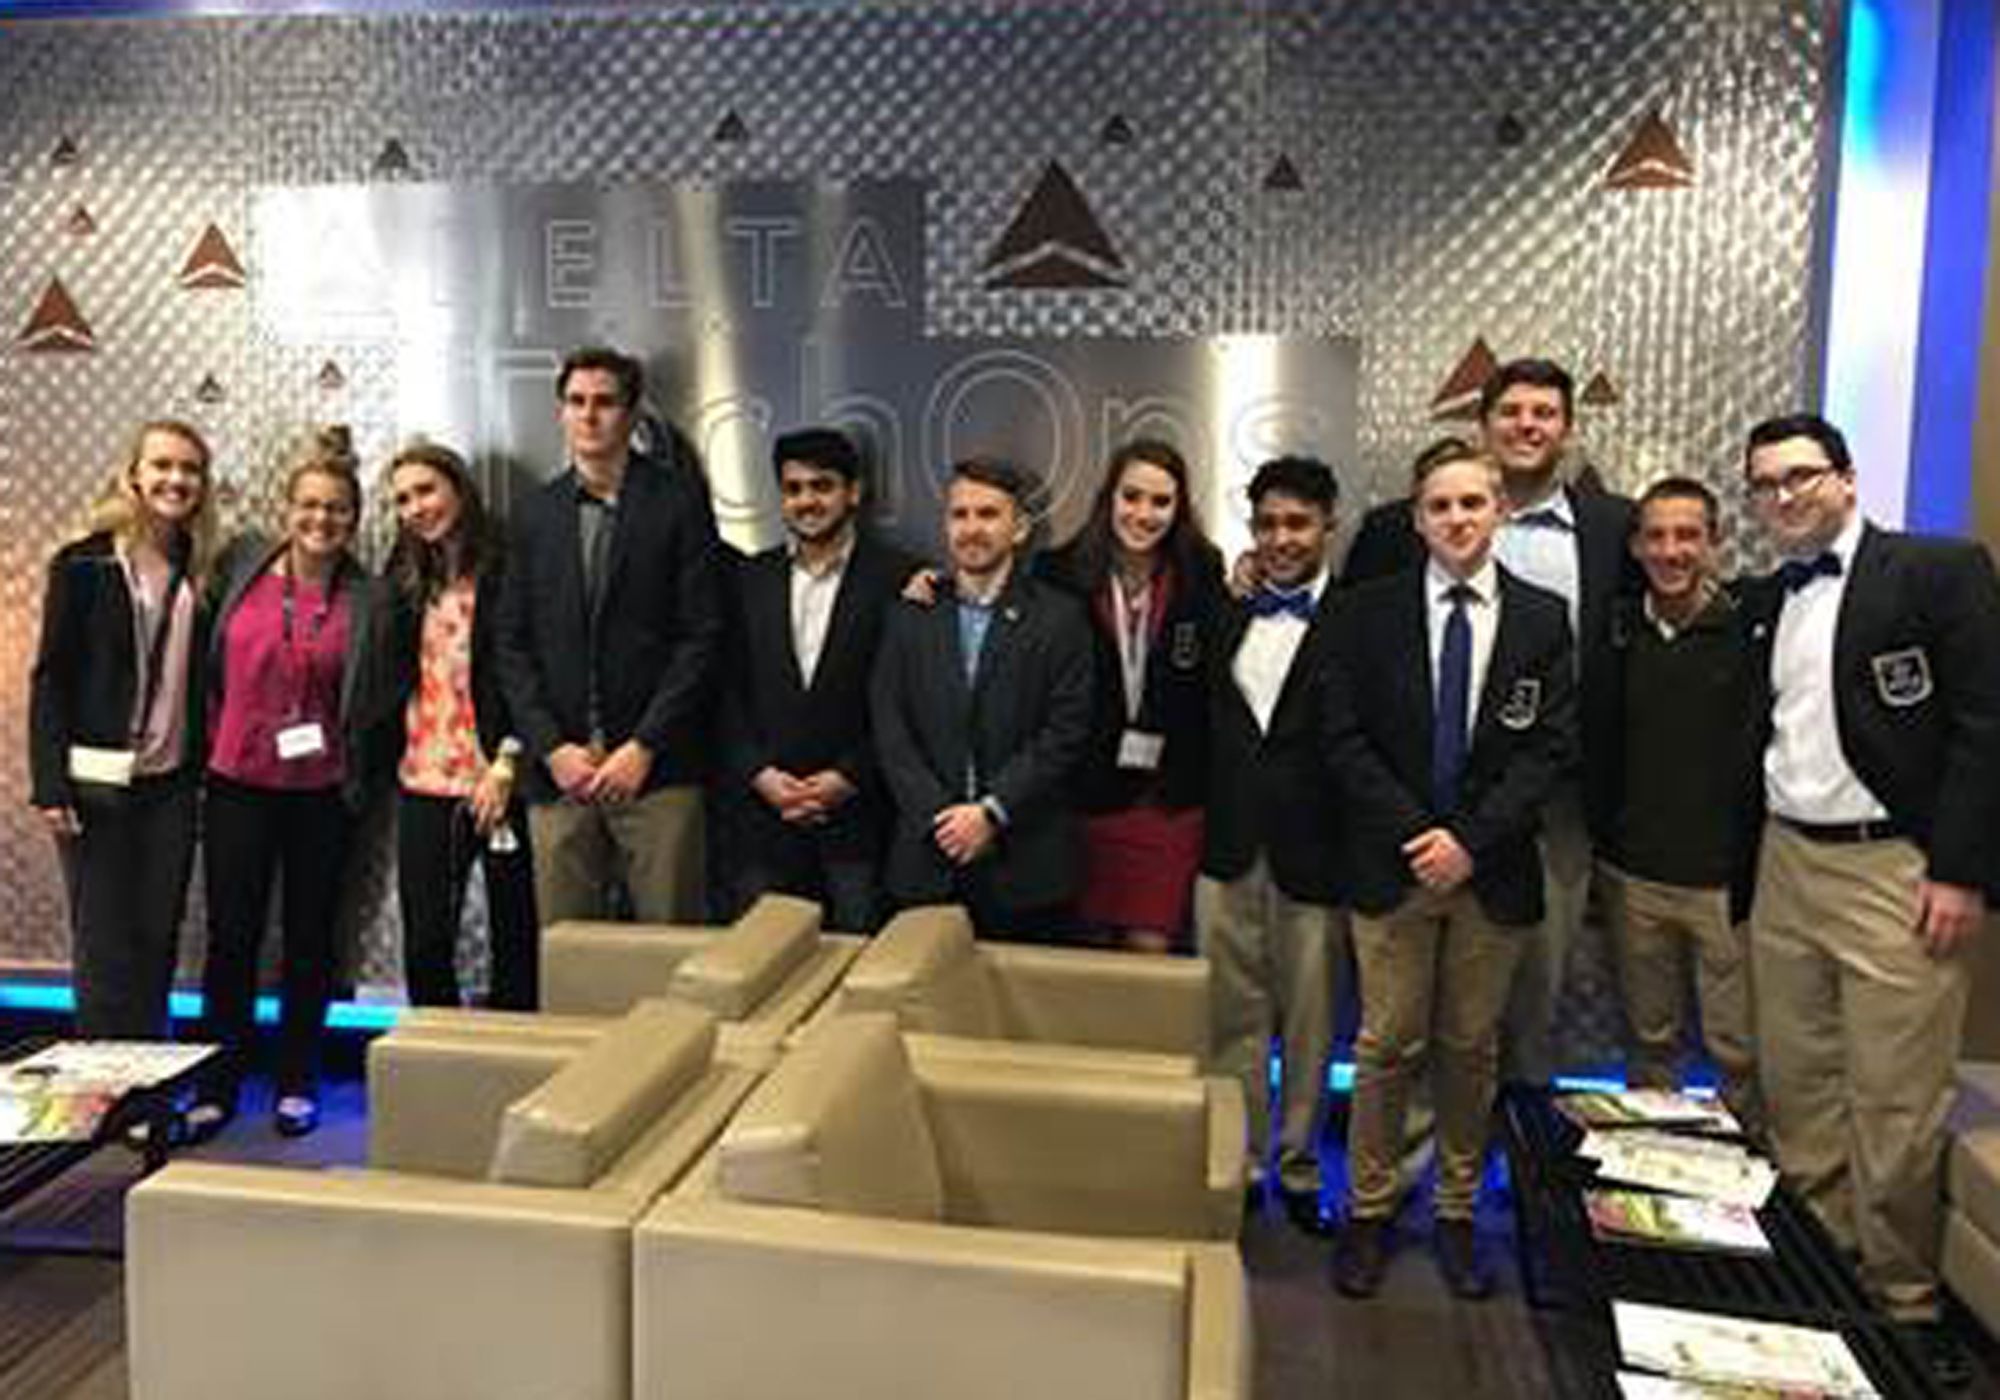 Avon Chamber Fund at HCCF Provides Grant to DECA Students to Attend International Competition.